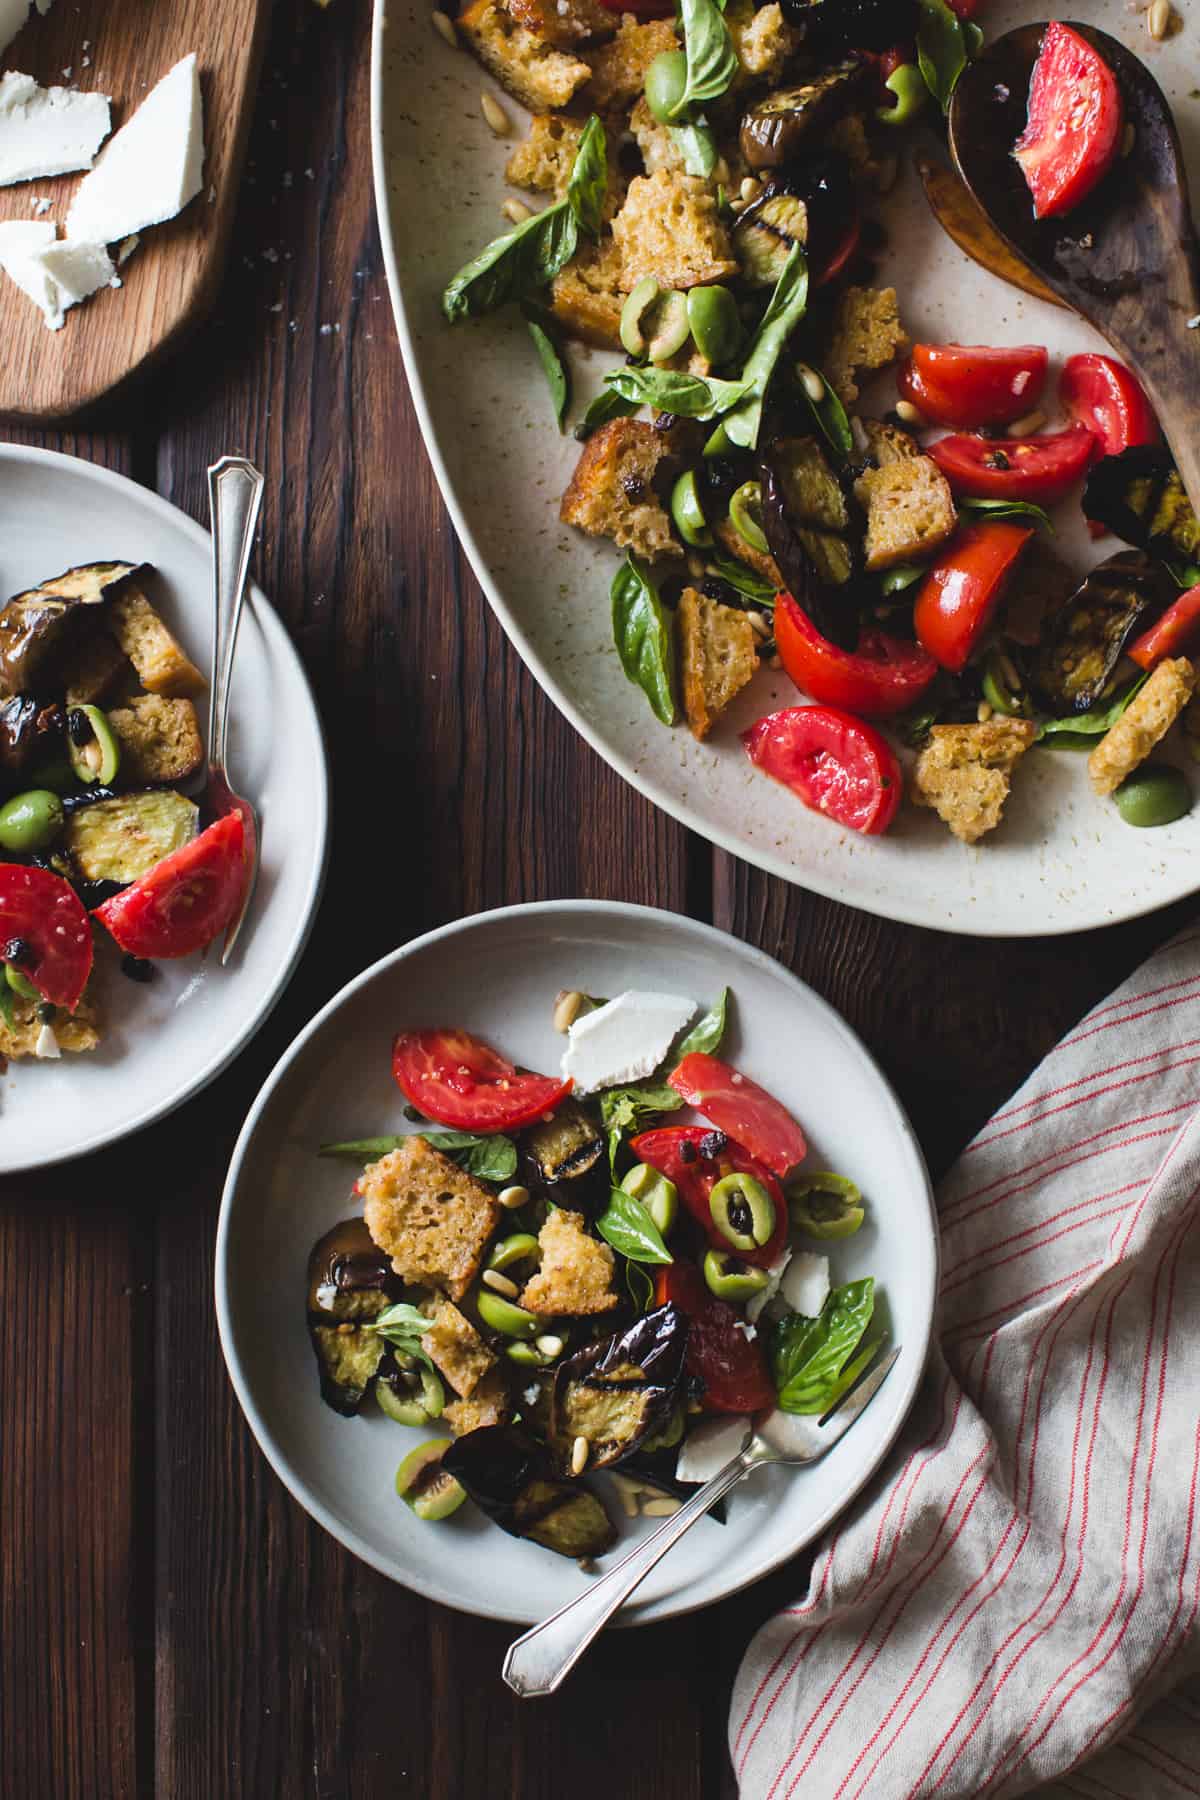 plates of Roasted Eggplant Panzanella with Capers, Olives, and Pine Nuts